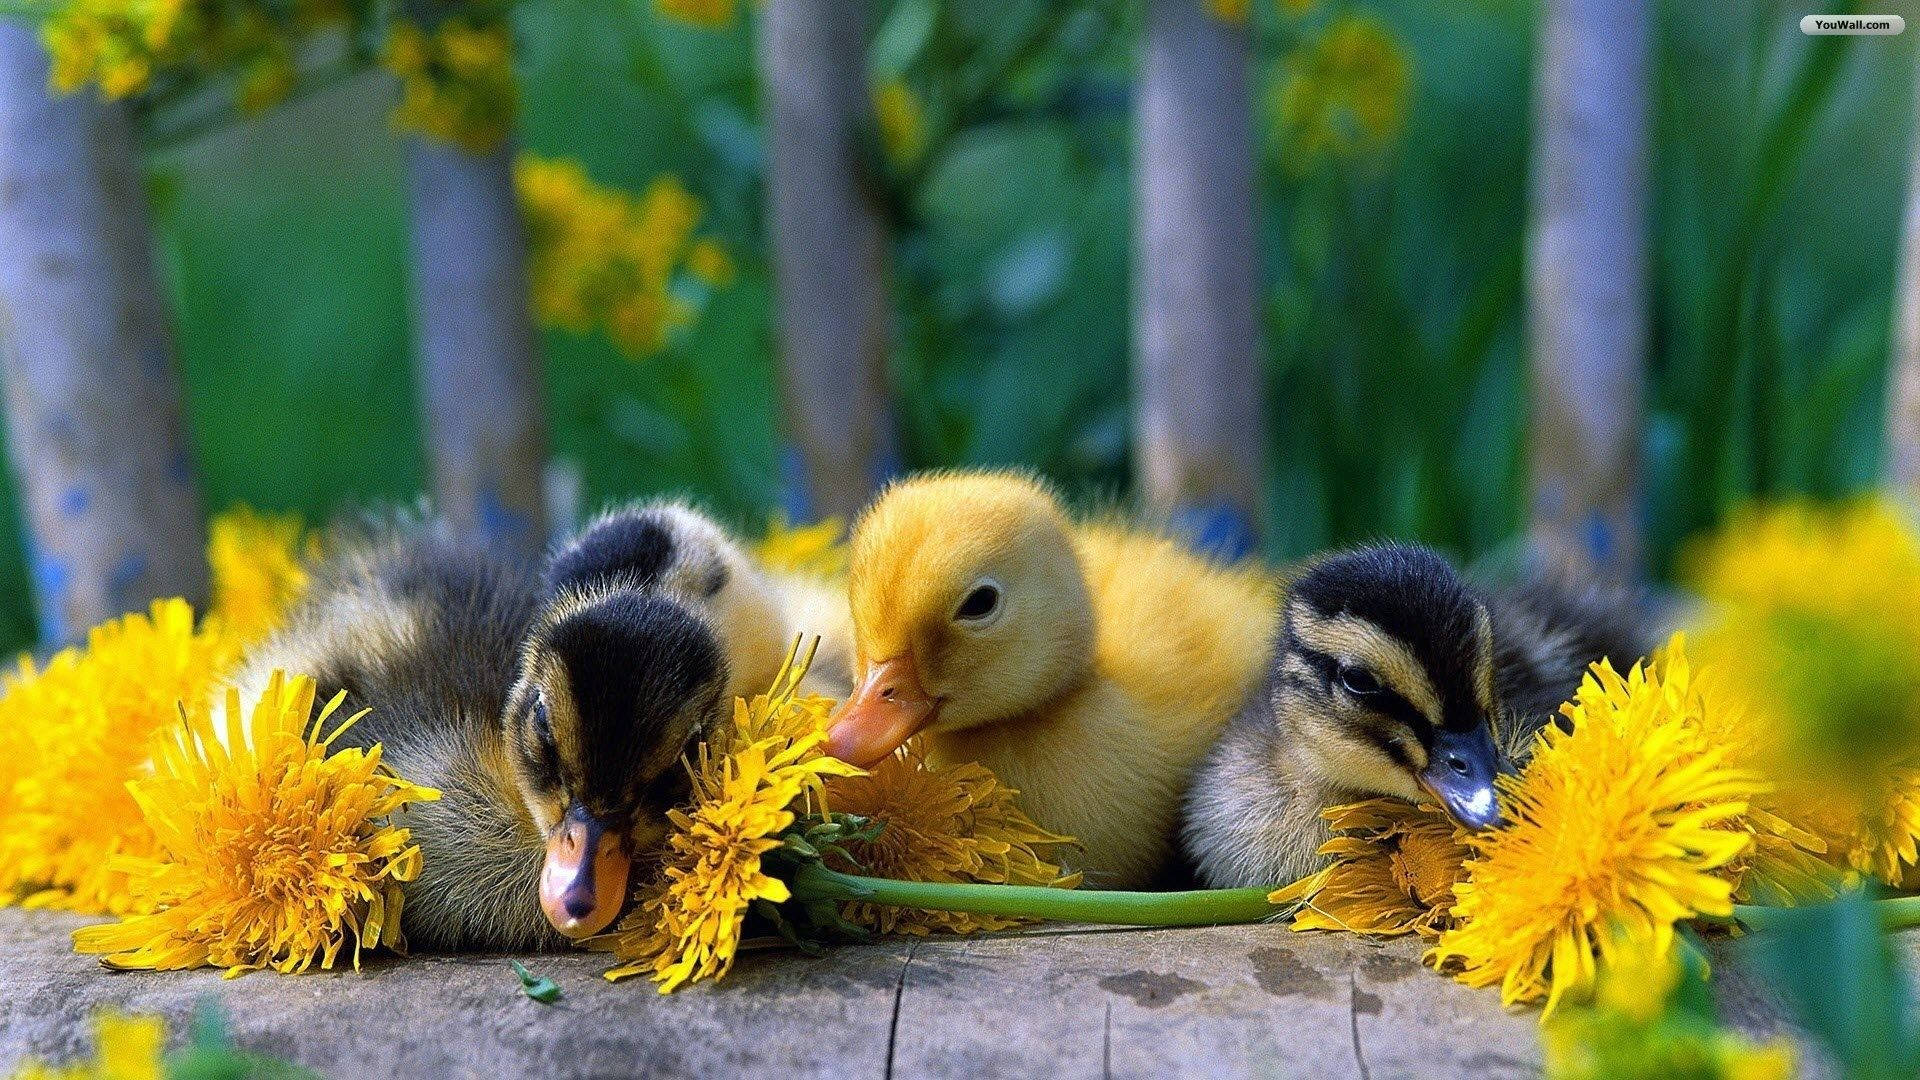 Baby Ducks With Flowers